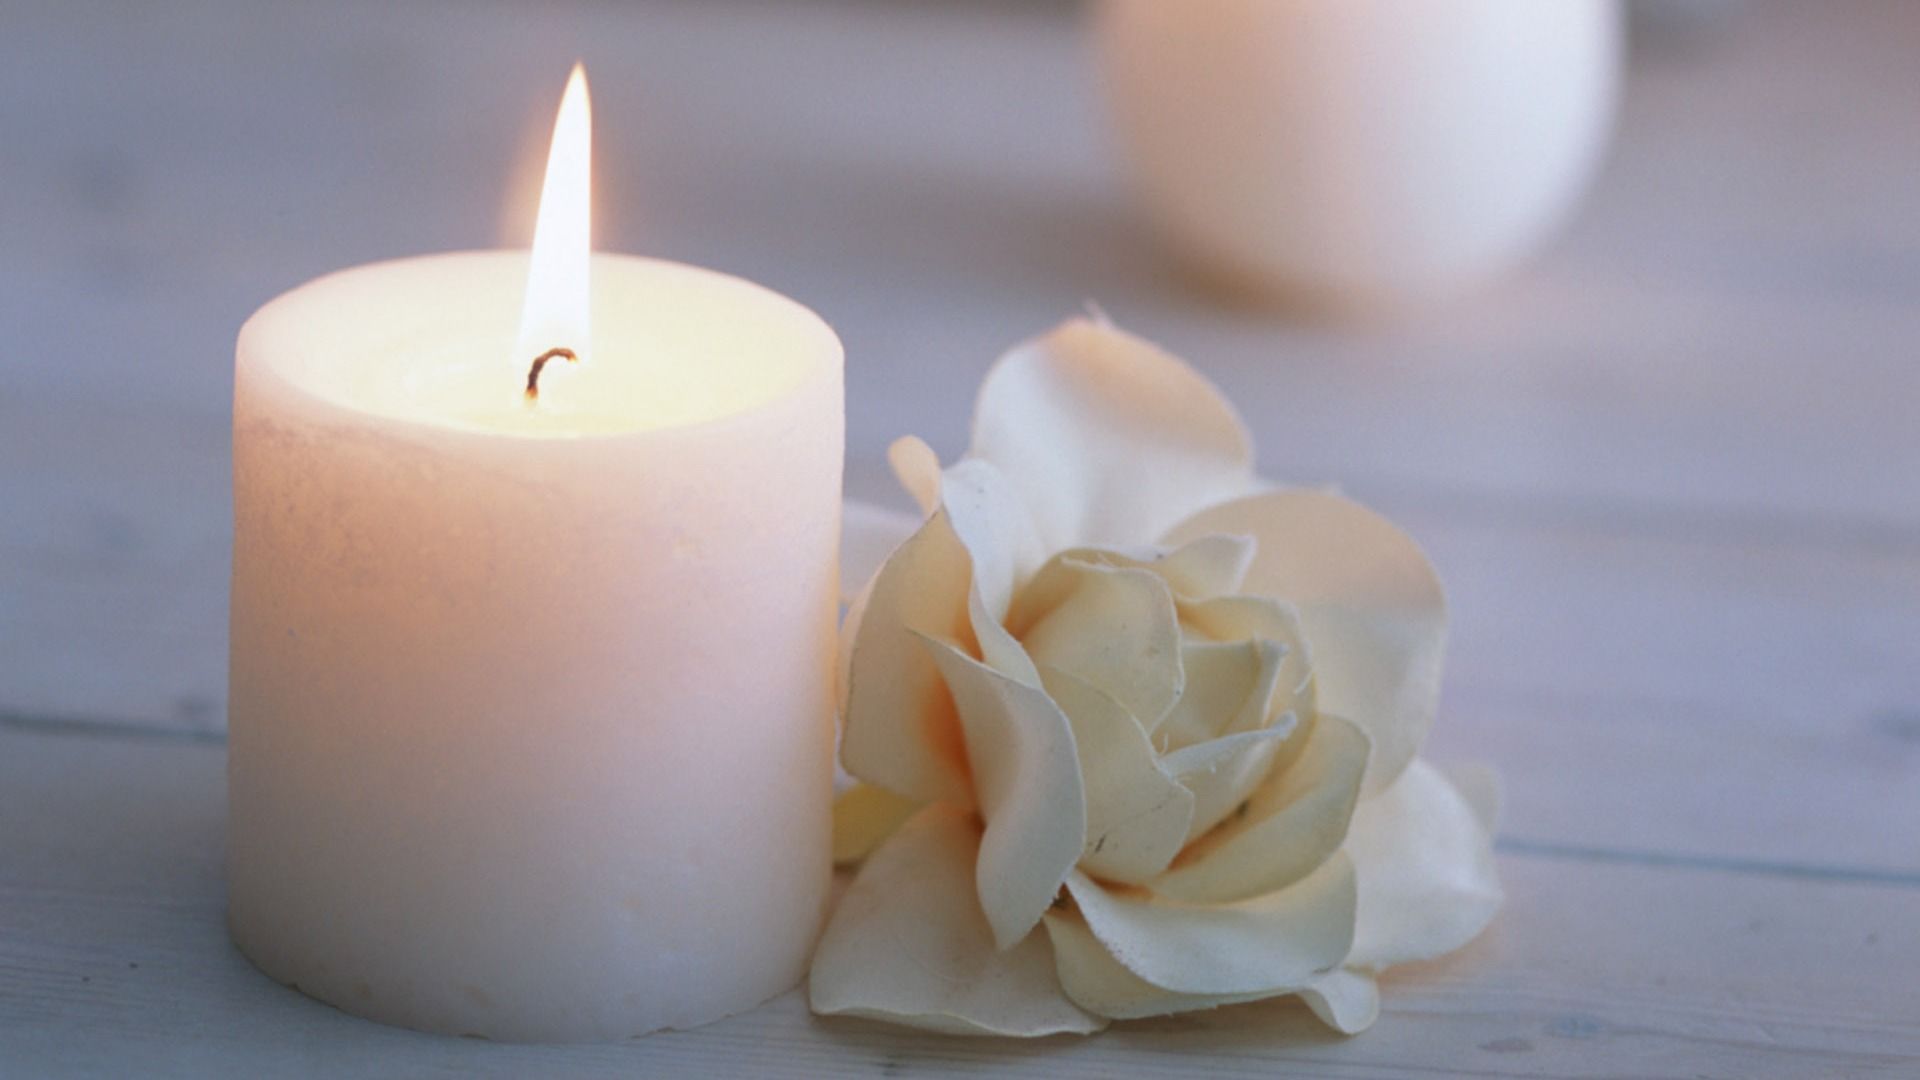 Candle 1080p Wallpaper